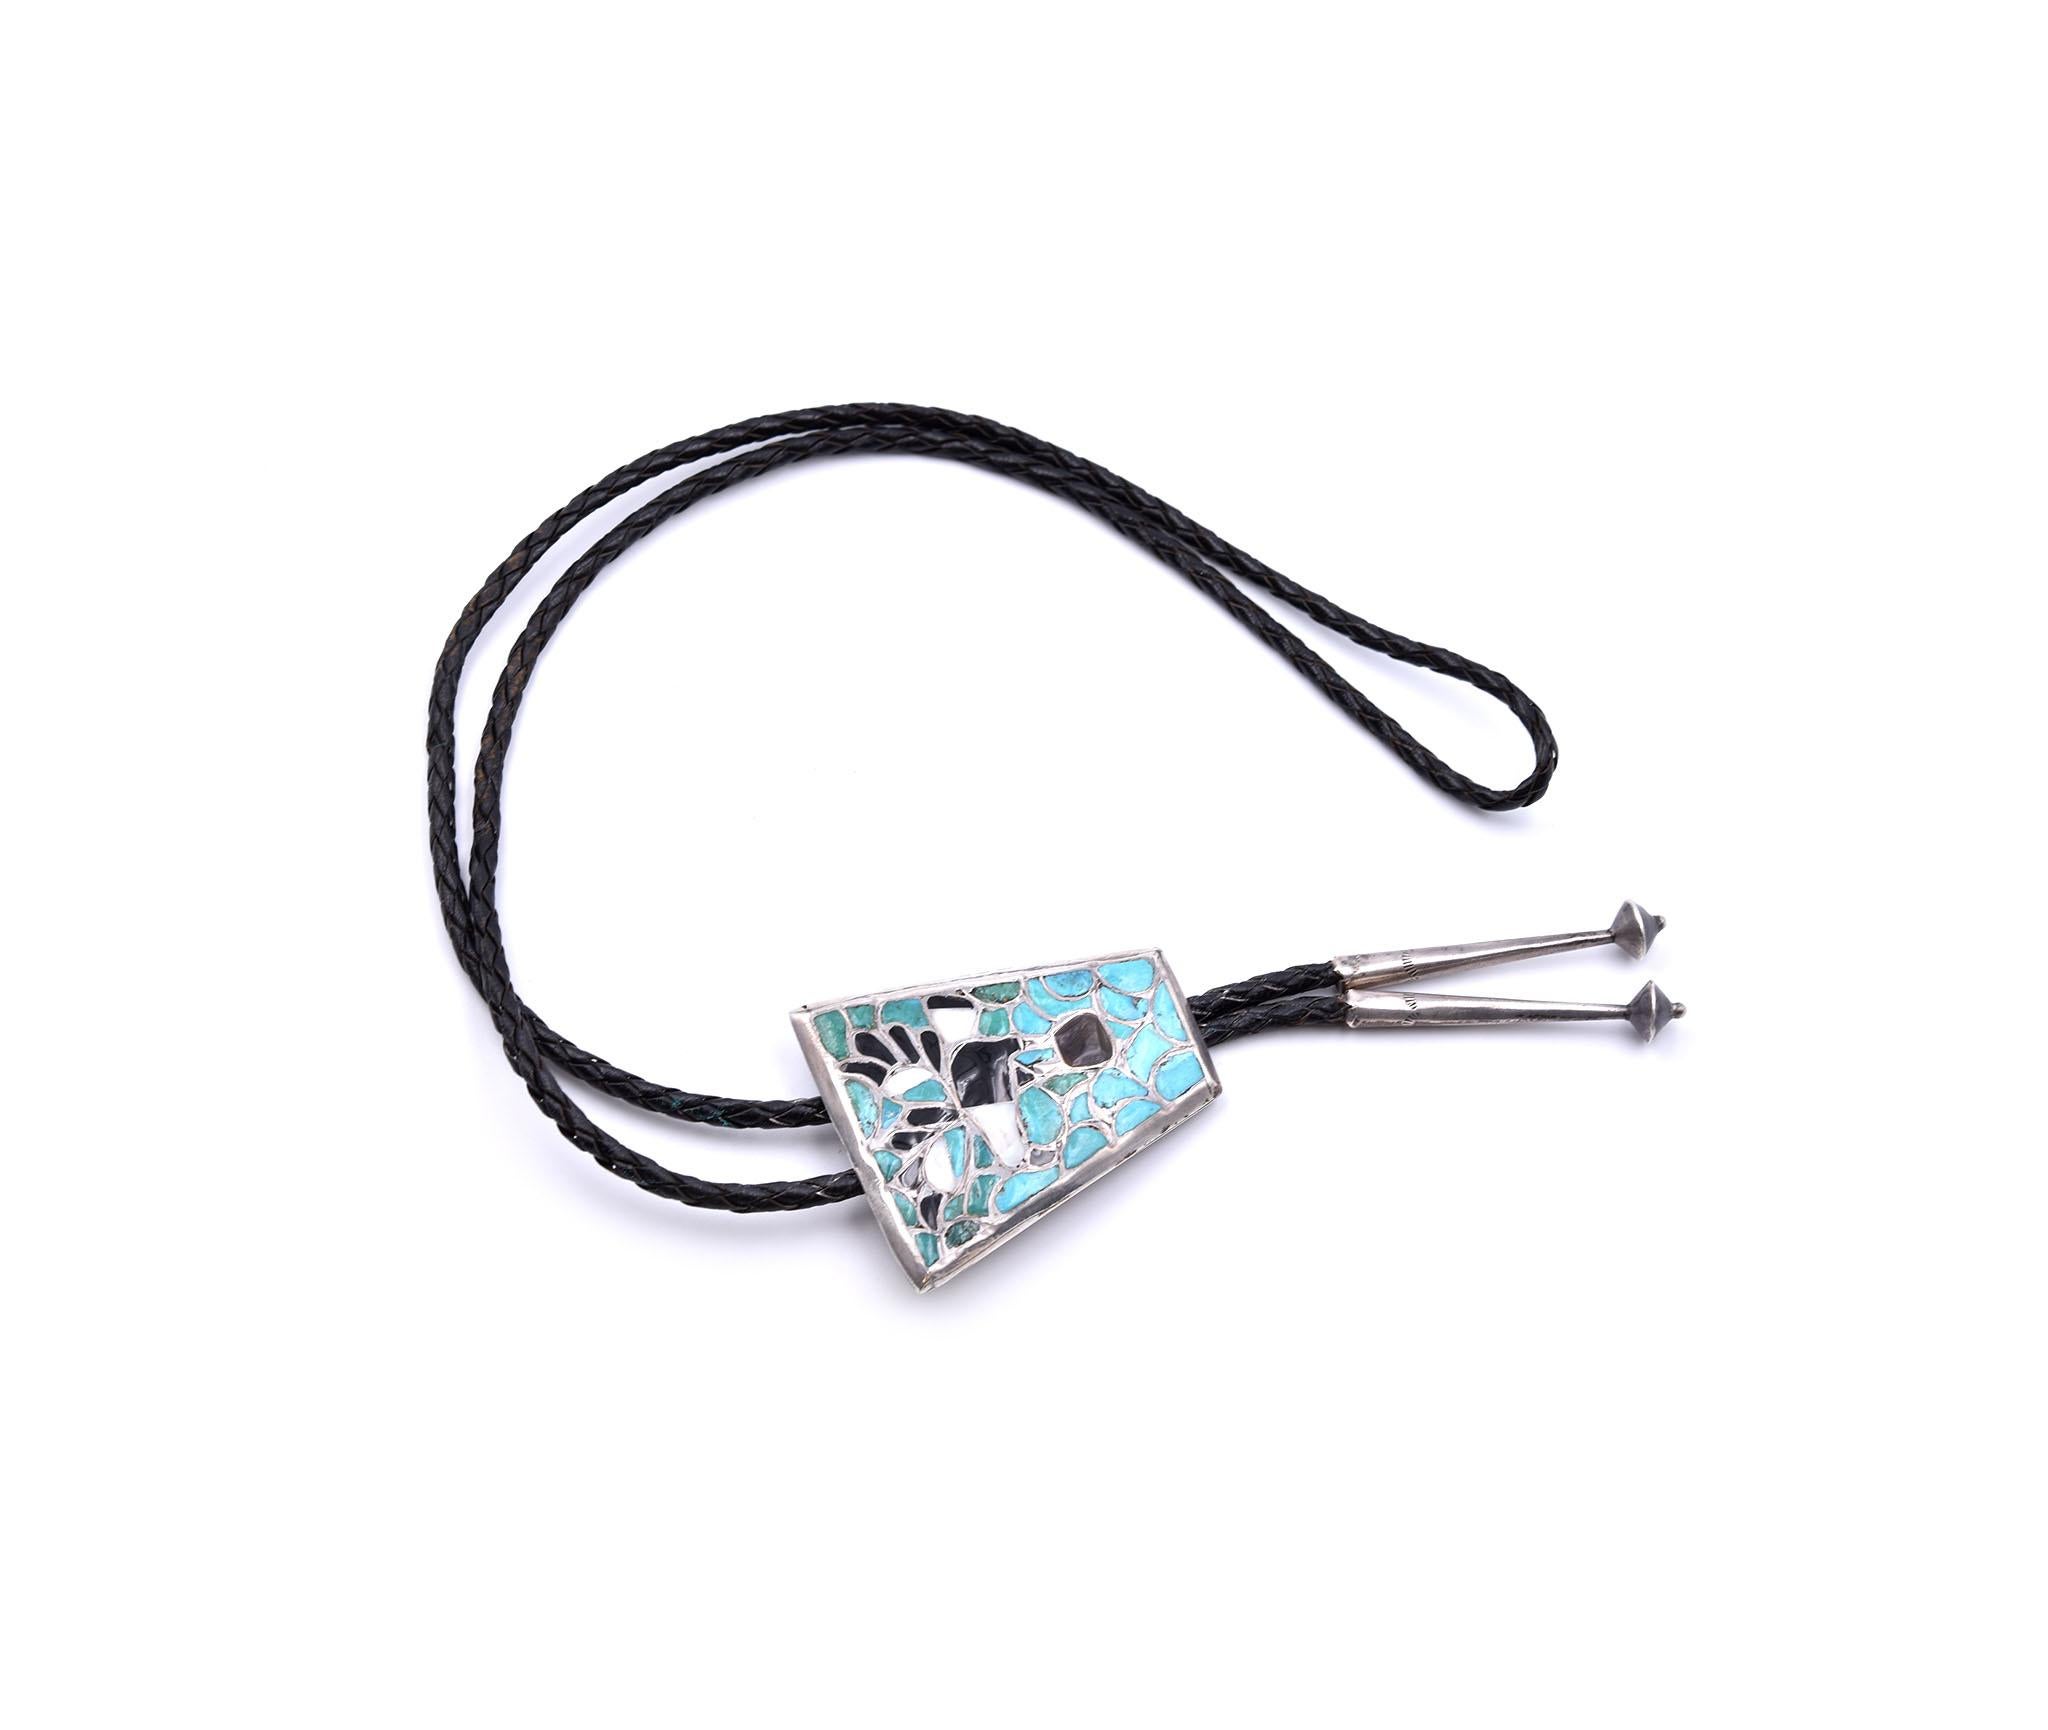 Designer: custom design hallmarked “Bennett”
Material: sterling silver
Gemstones: turquoise, mother of pearl, and onyx
Dimensions: tie measures 19 inches in length and pendant measures 60mm x 50mm
Weight: 45.09 grams
